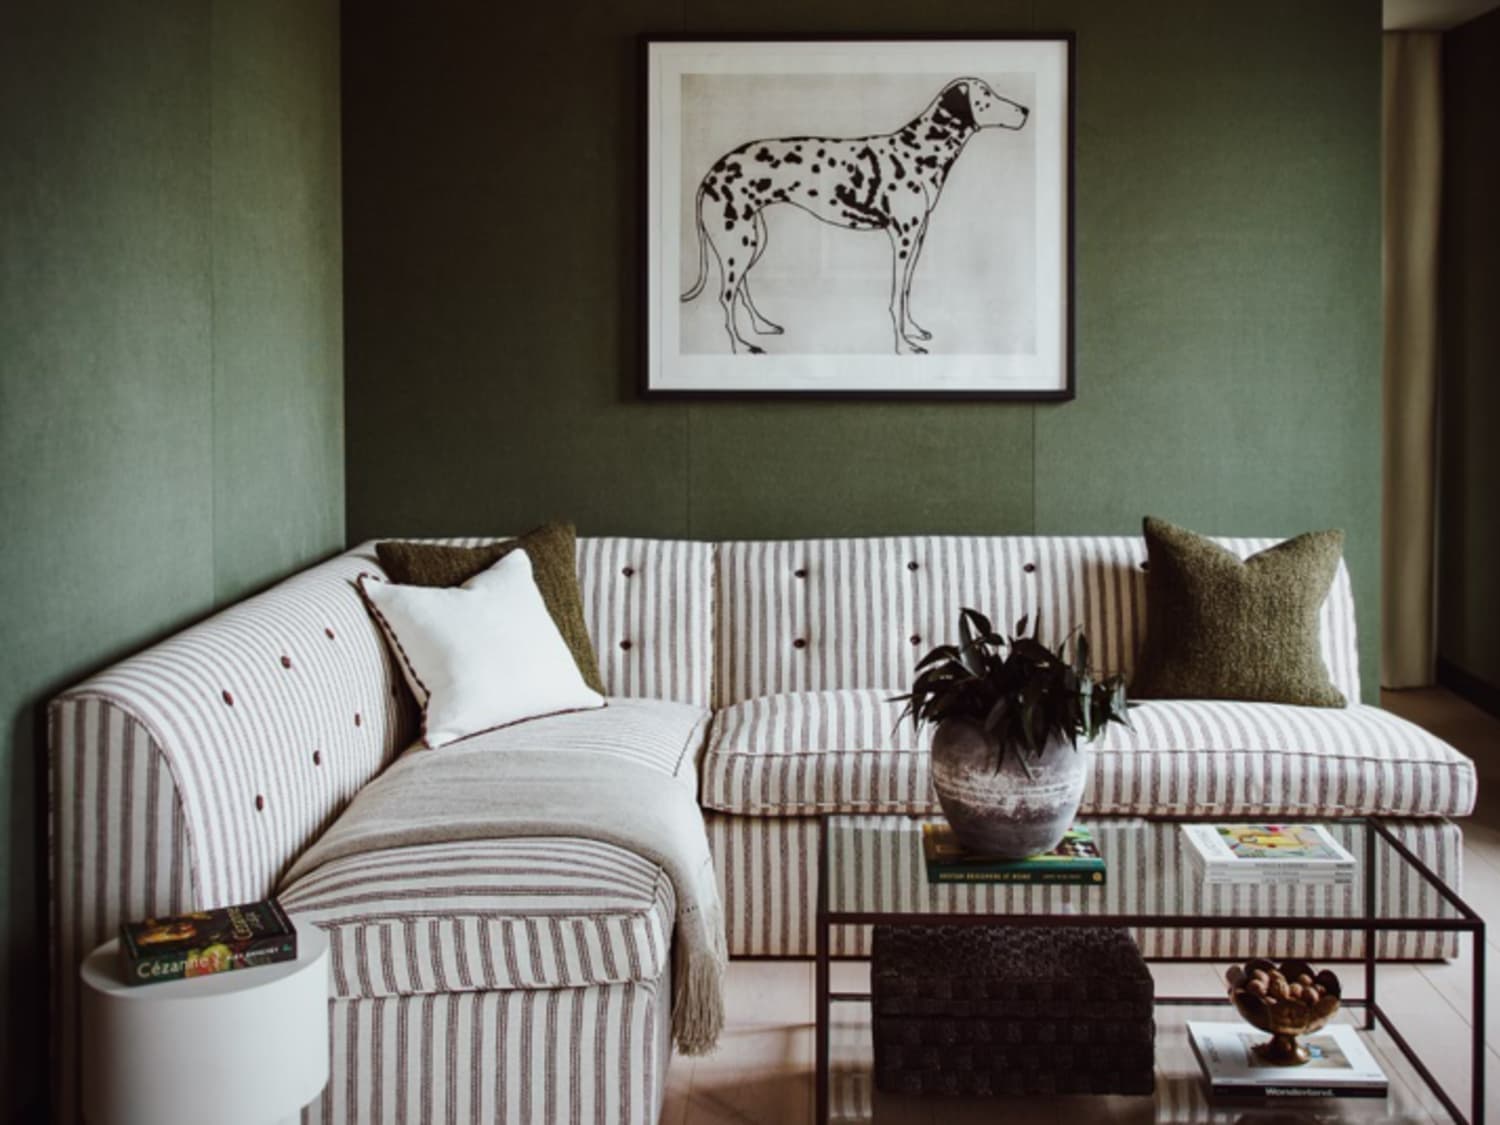 New Buffalo Check Decor Trend for Your Home - Southern Crush at Home